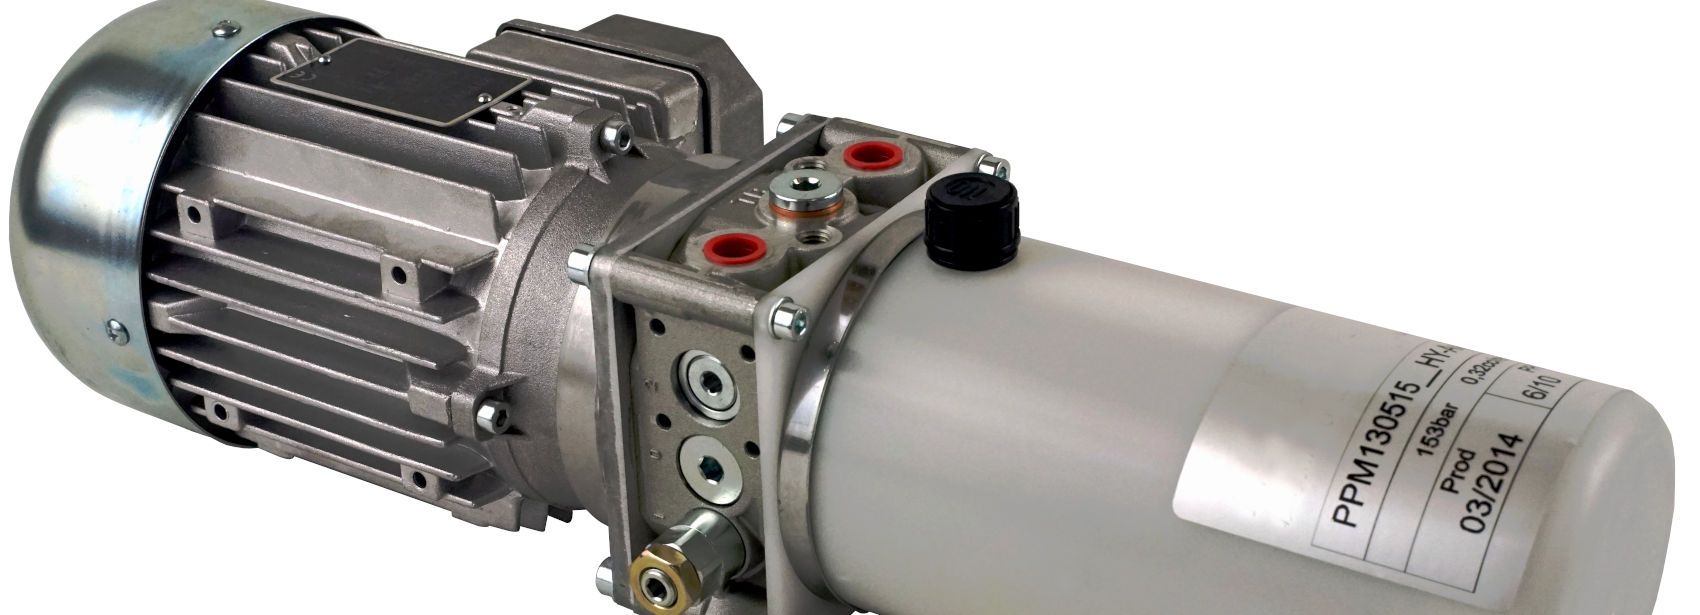 Understanding the Functionality of 12 Volt Hydraulic Power Packs header image